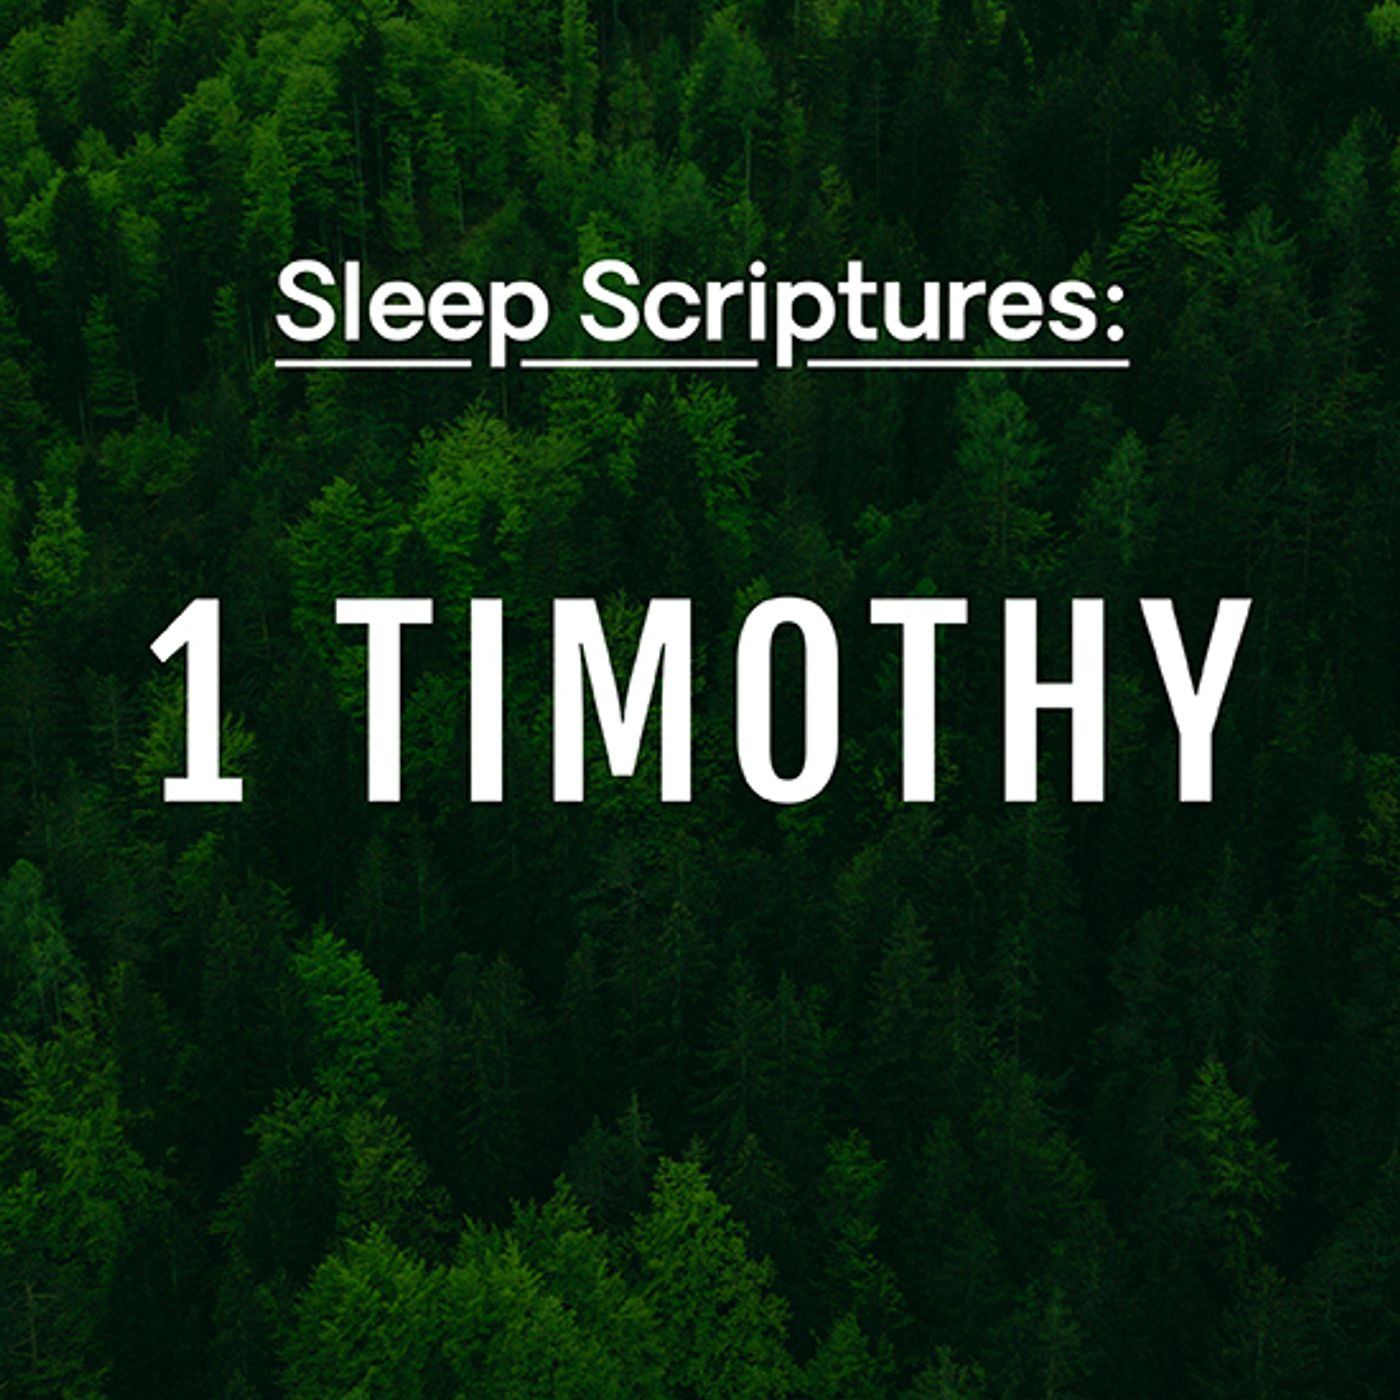 Sleep Scriptures: Paul's First Letter to Timothy